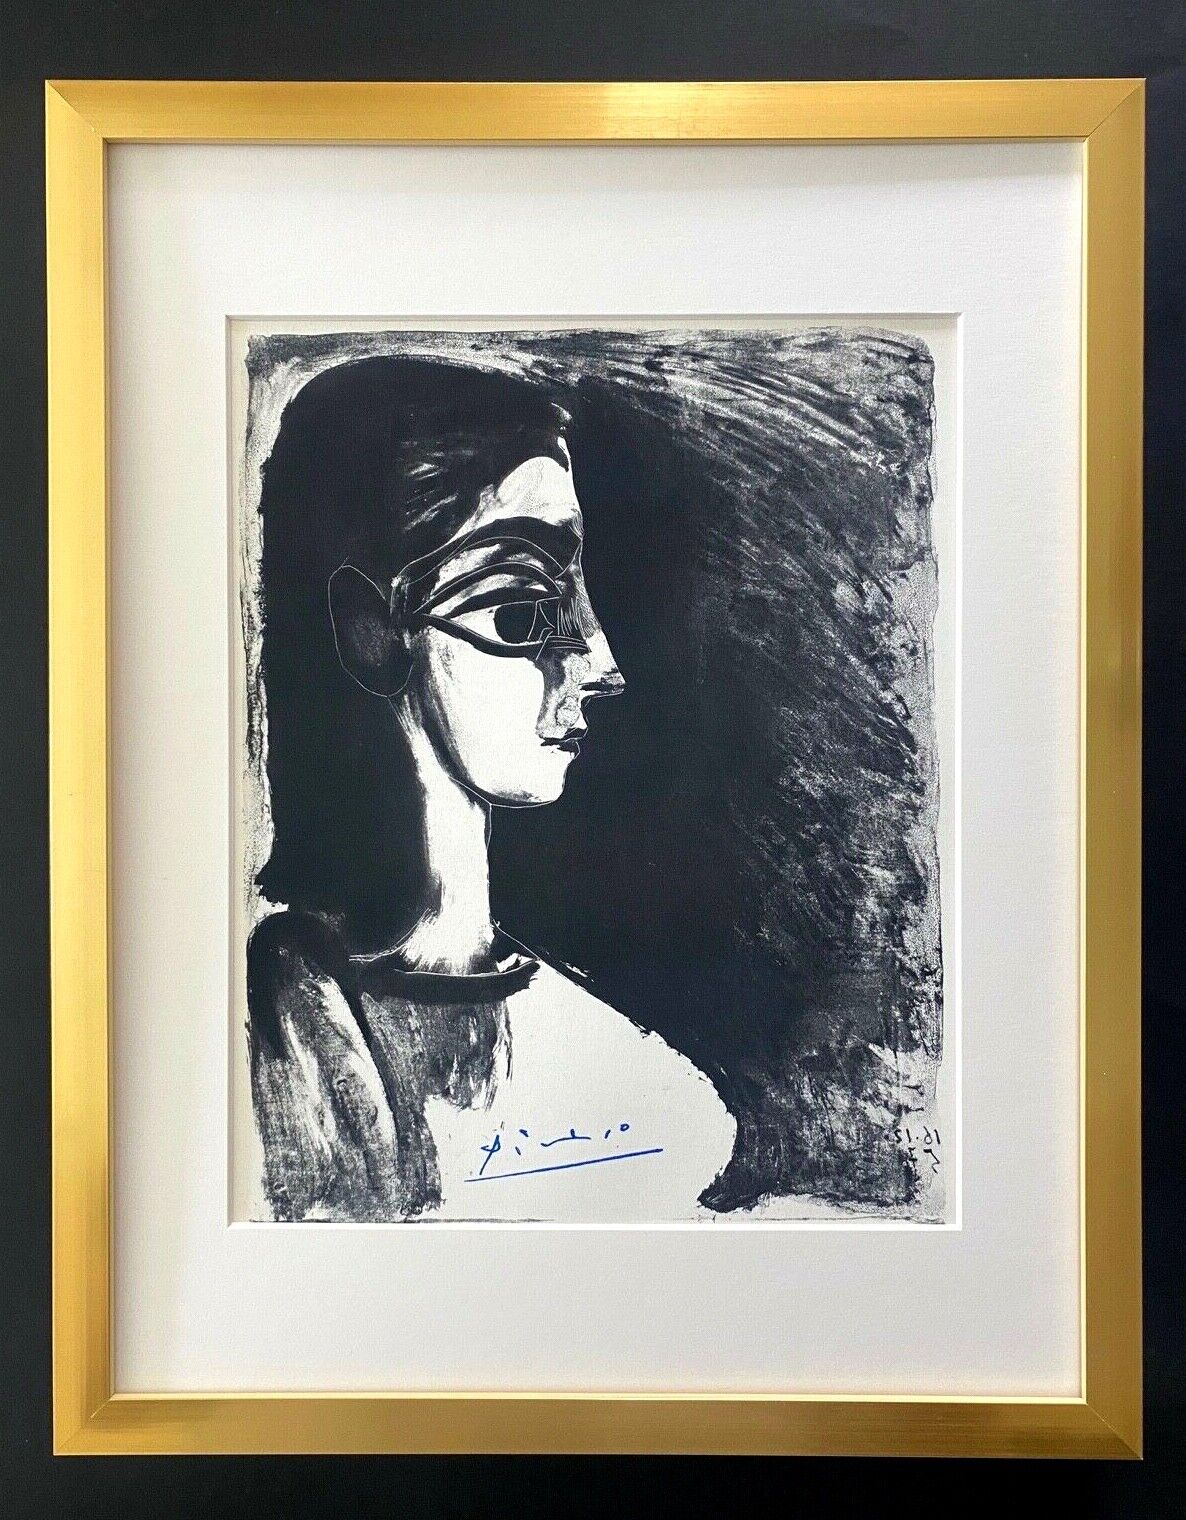 PABLO PICASSO + 1955 SIGNED SUPERB PRINT MATTED 11 X 14 + LIST $595=